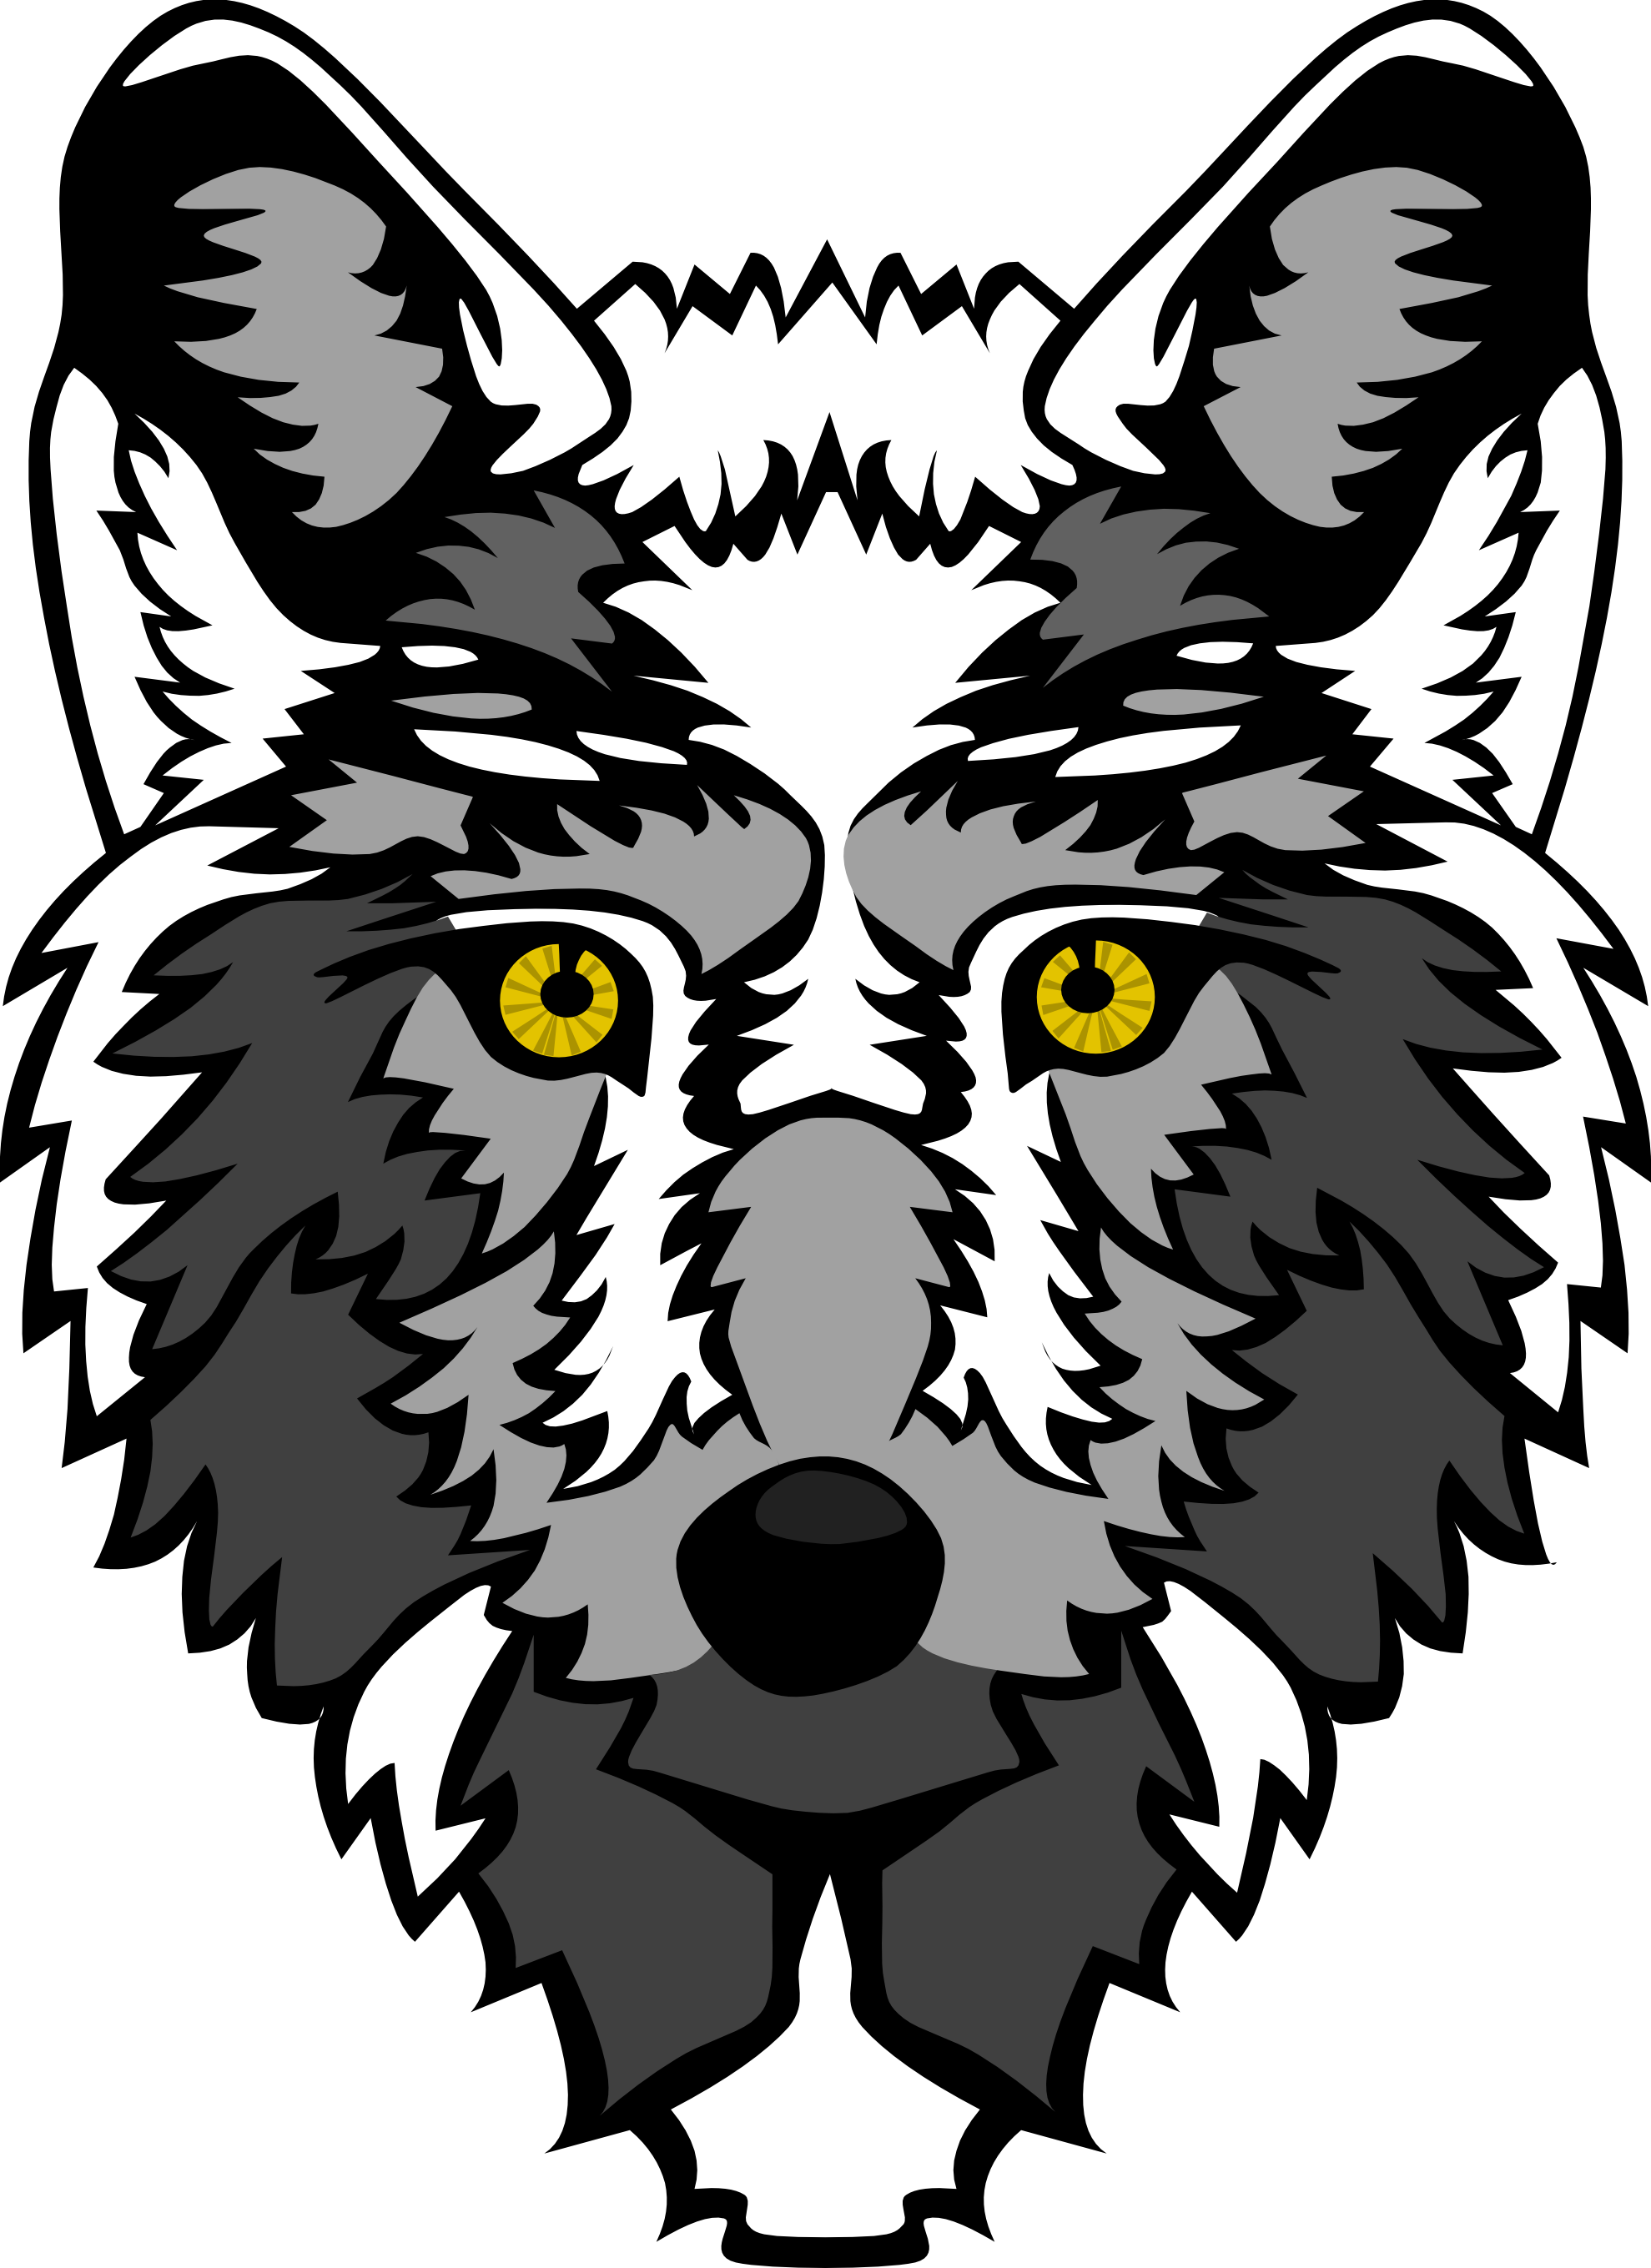 free-wolf-vector-art-download-free-wolf-vector-art-png-images-free